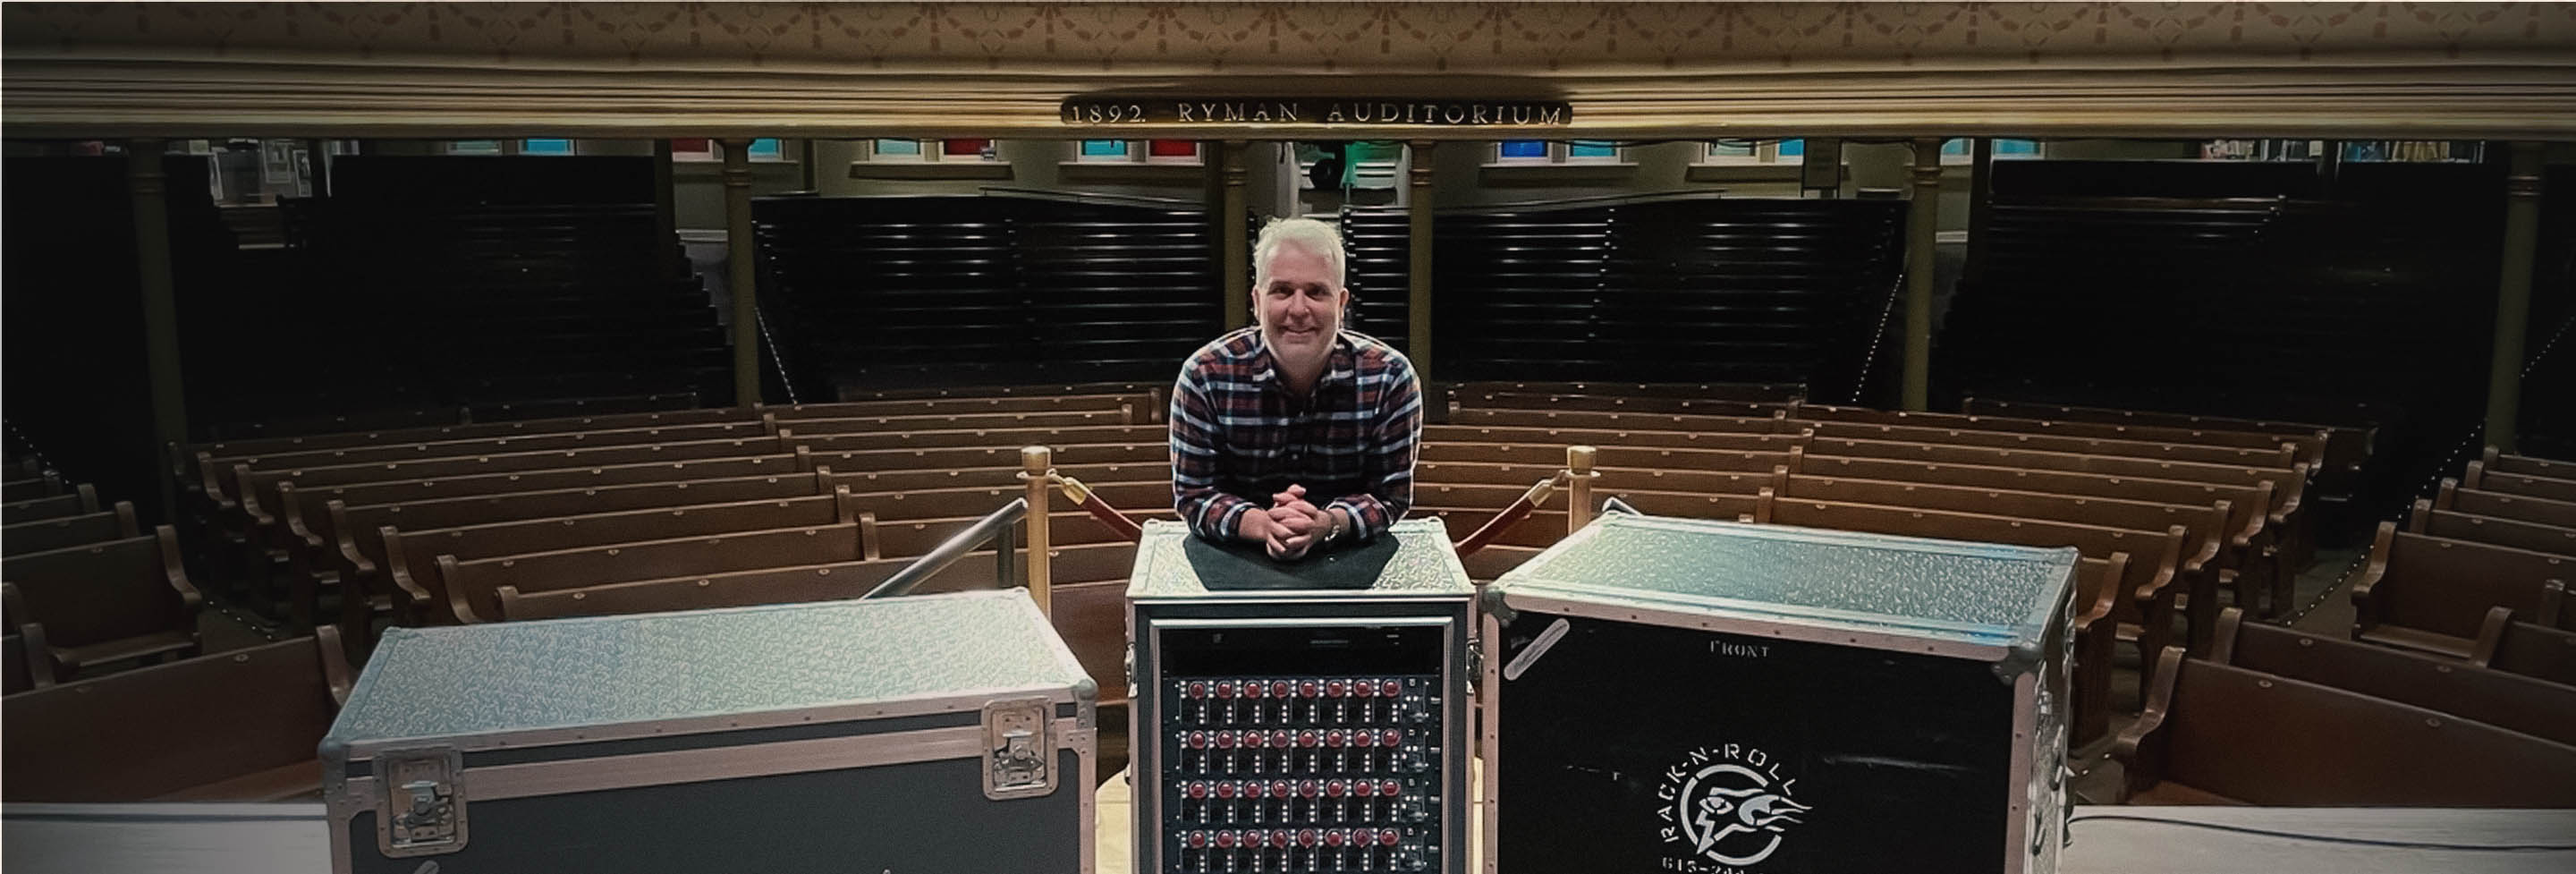 Talking live recording with Rob Dennis, owner of Rack-N-Roll Audio